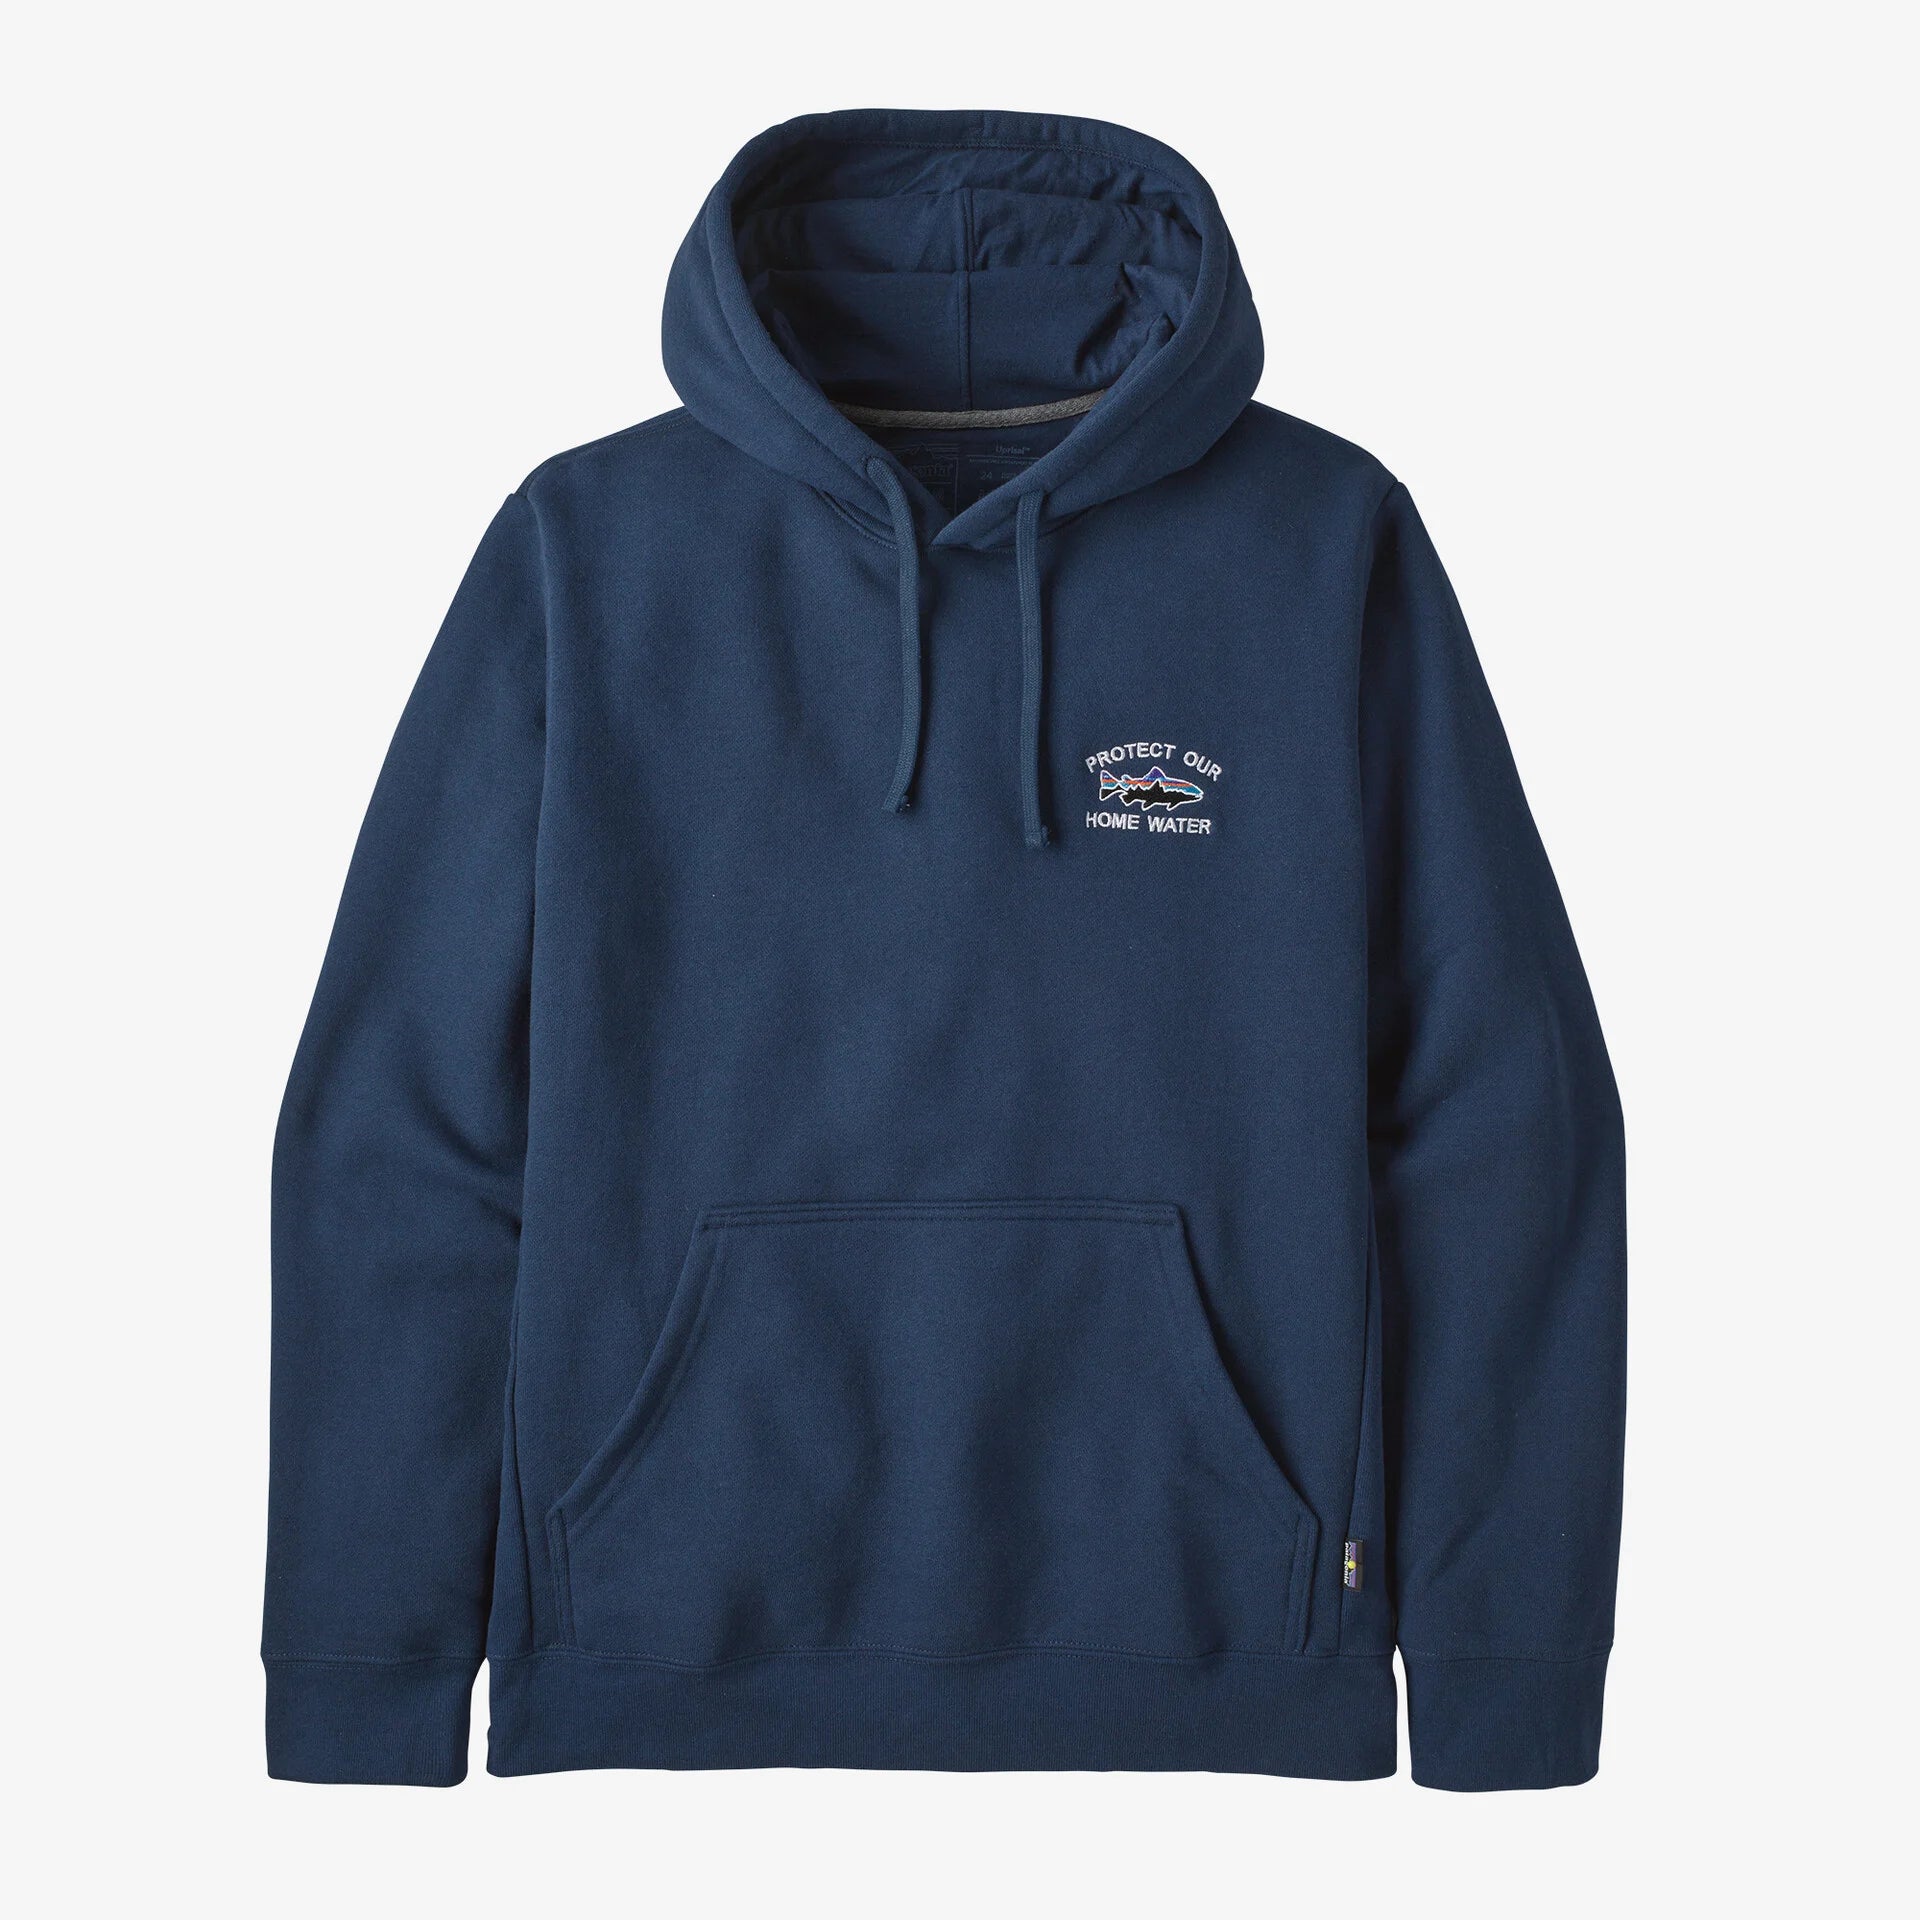 patagonia / パタゴニア | Home Water Trout Uprisal Hoody - LMBE | 通販 - 正規取扱店 |  wagon / ワゴン